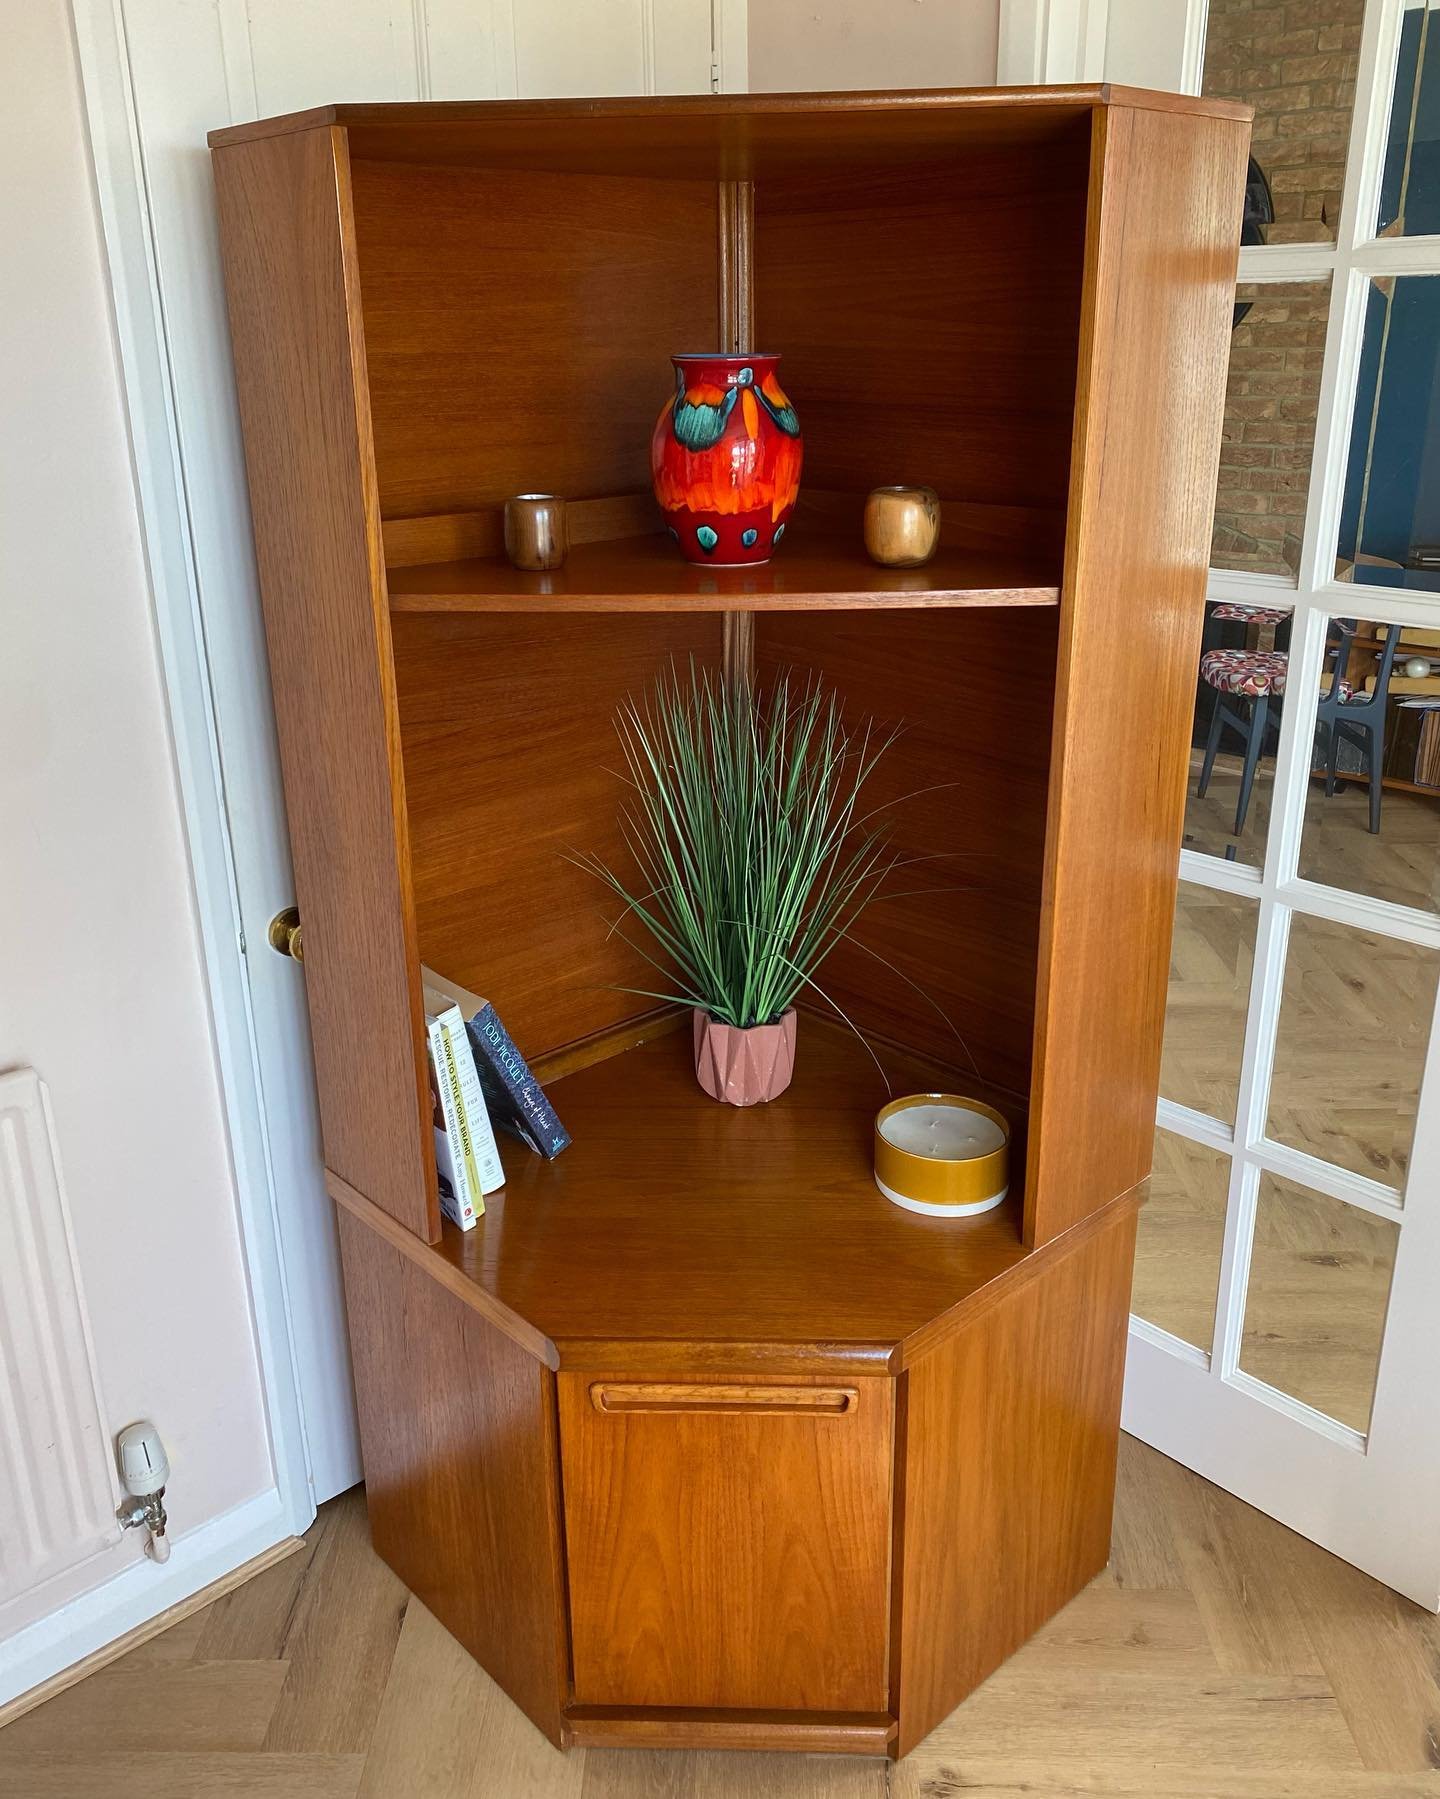 Just refurbished!

This mid century teak corner unit is now available from my shop. It came to me very run down and has been affected by damp. I cleaned it, dried it out, repaired it, rubbed it down and oiled and polished. It&rsquo;s now ready for a 